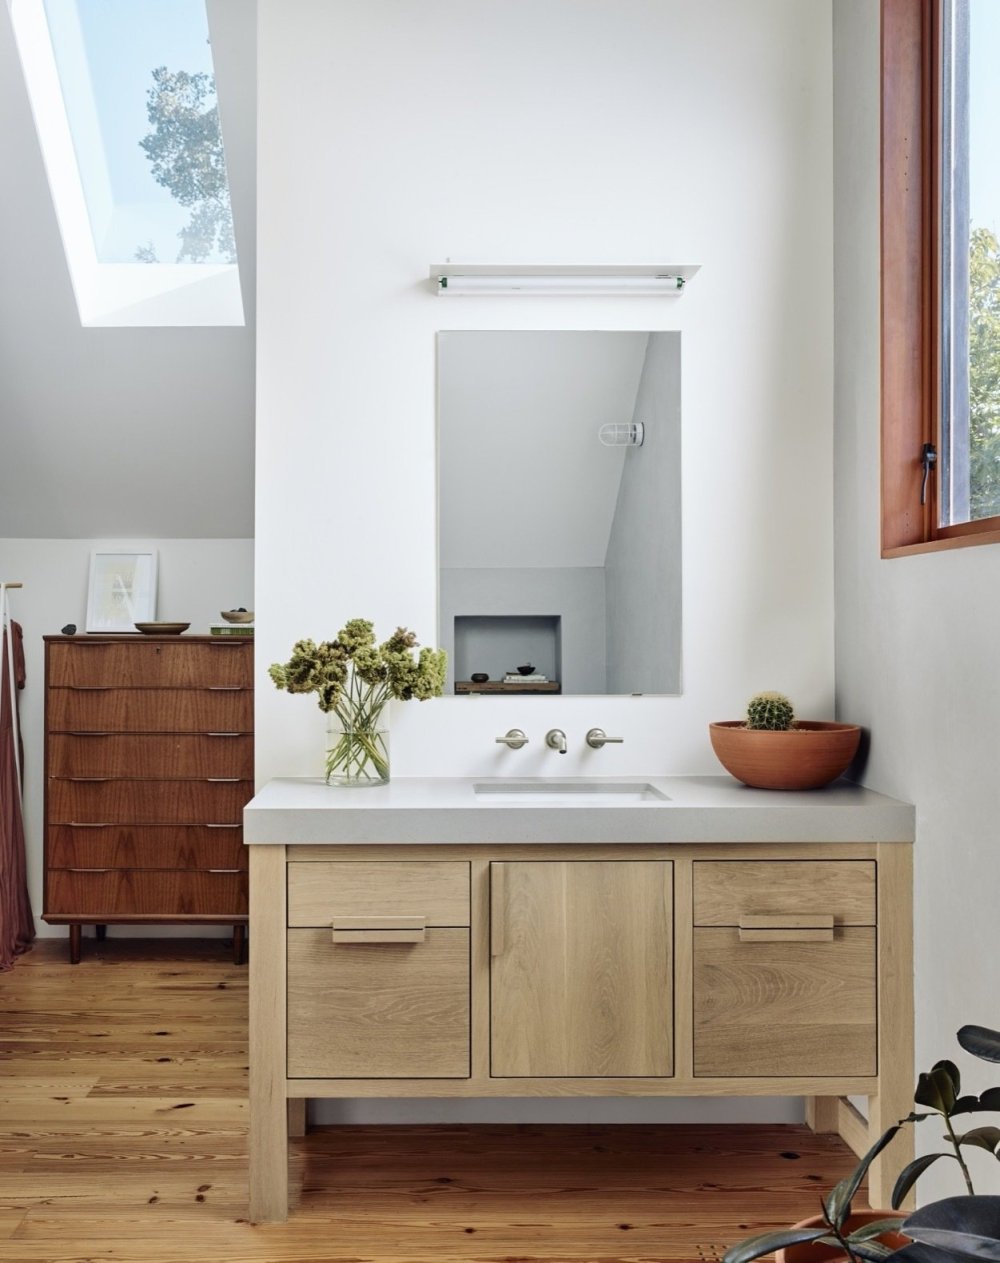 Casey Dunn，梦幻奥斯汀之家_like-the-kitchen-the-closet-vanity-features-stained-white-oak-cabinetry.jpg